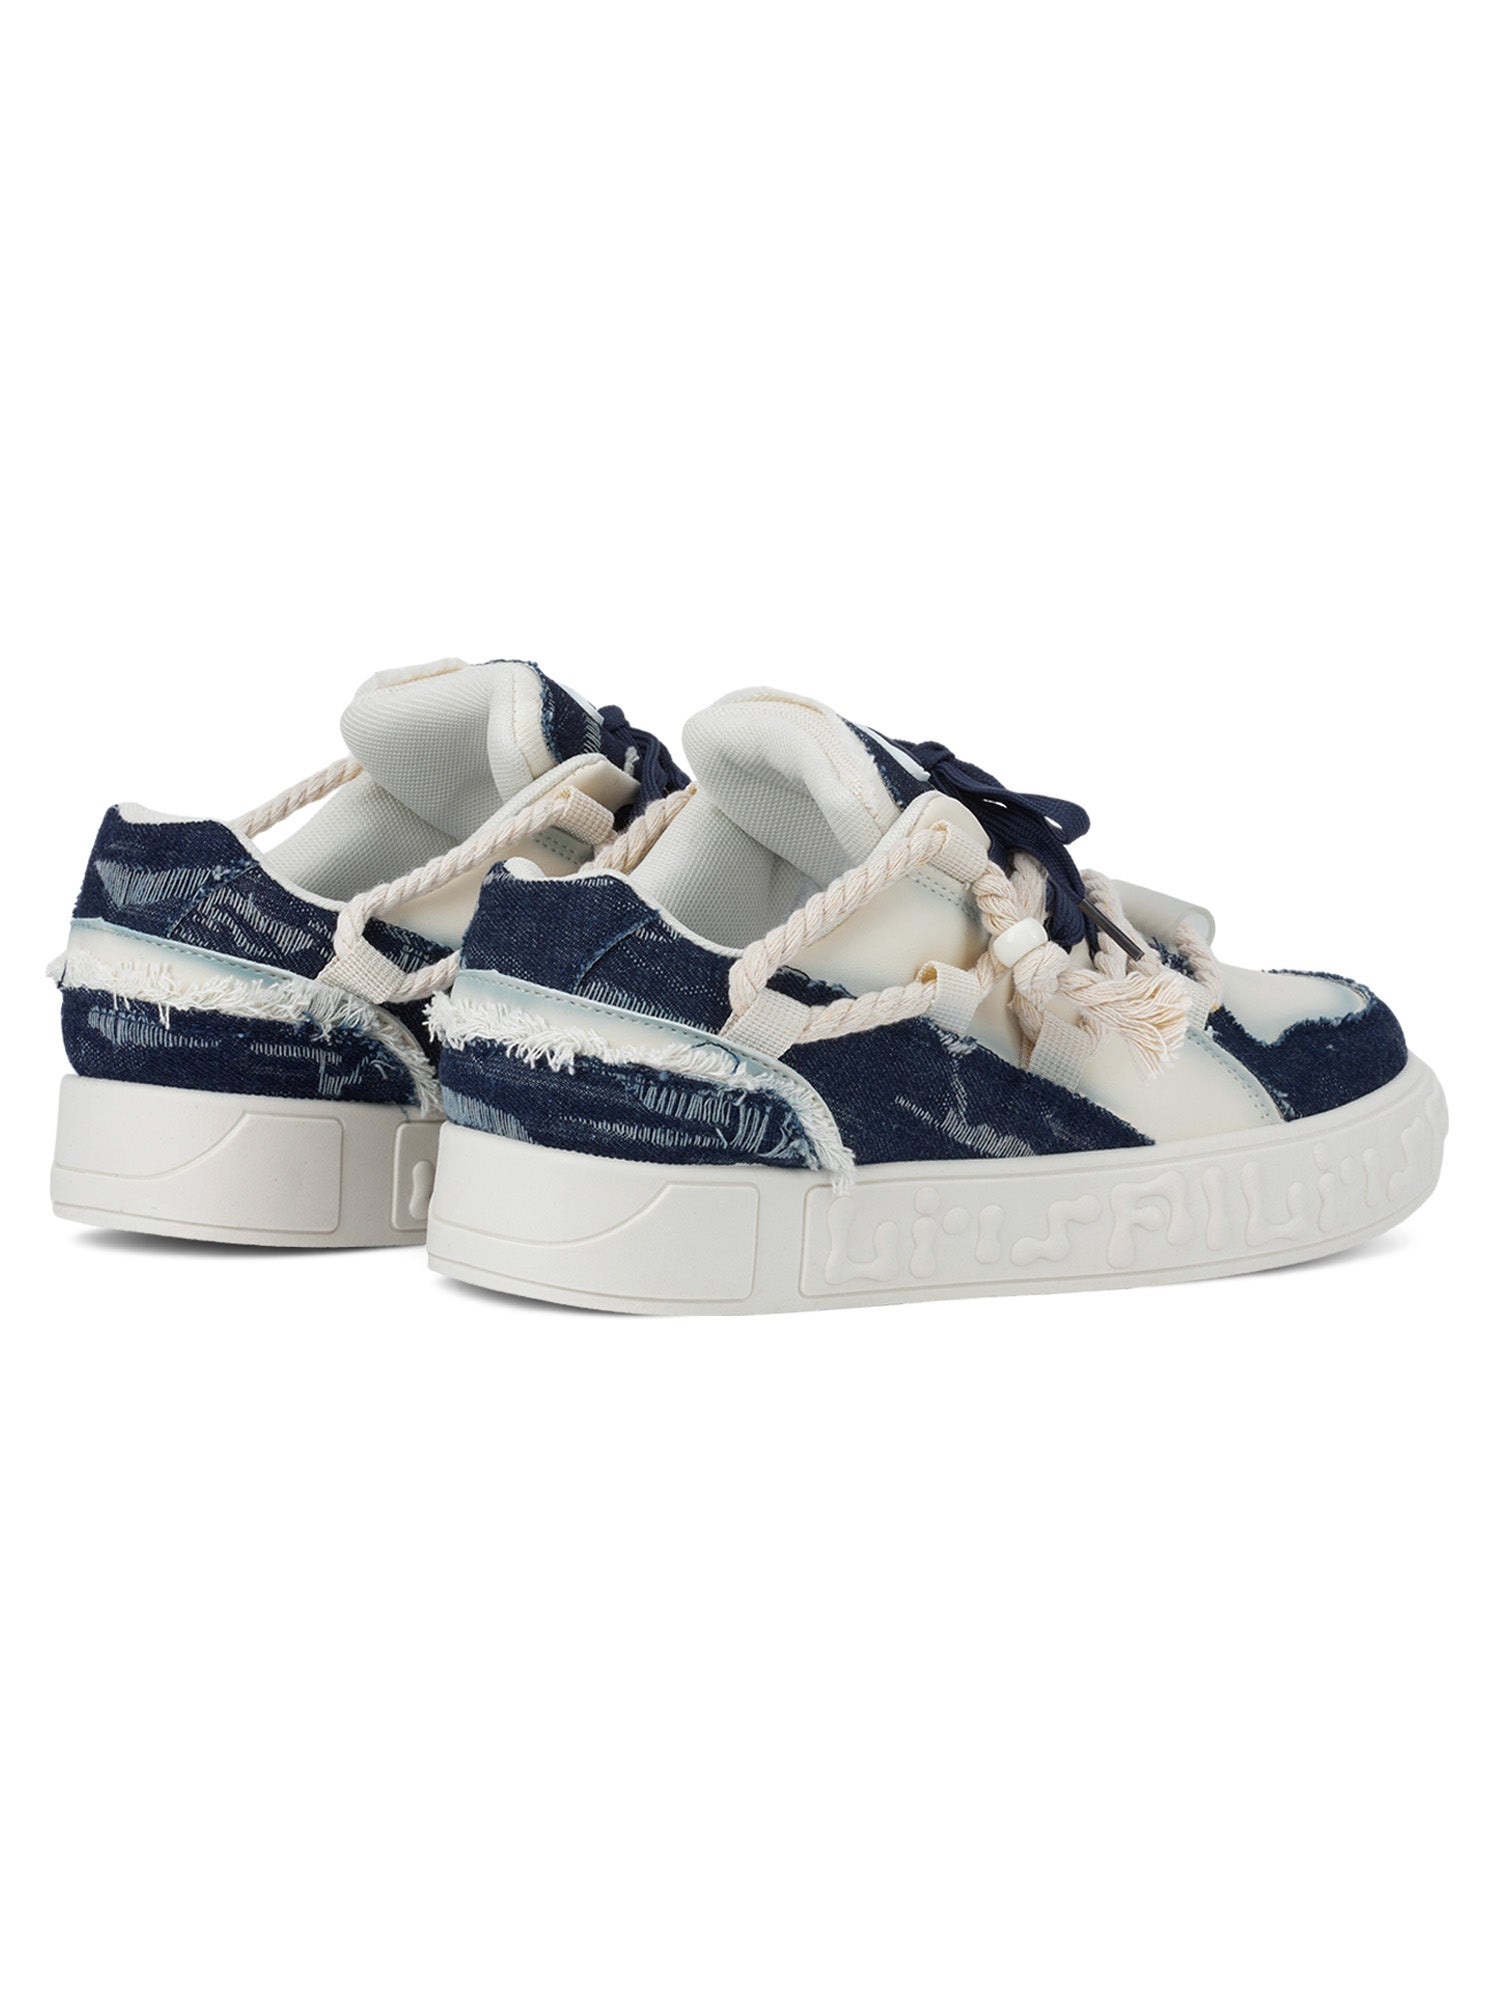 Thesupermade Rope Knot Design Fashion Sneakers - 2012